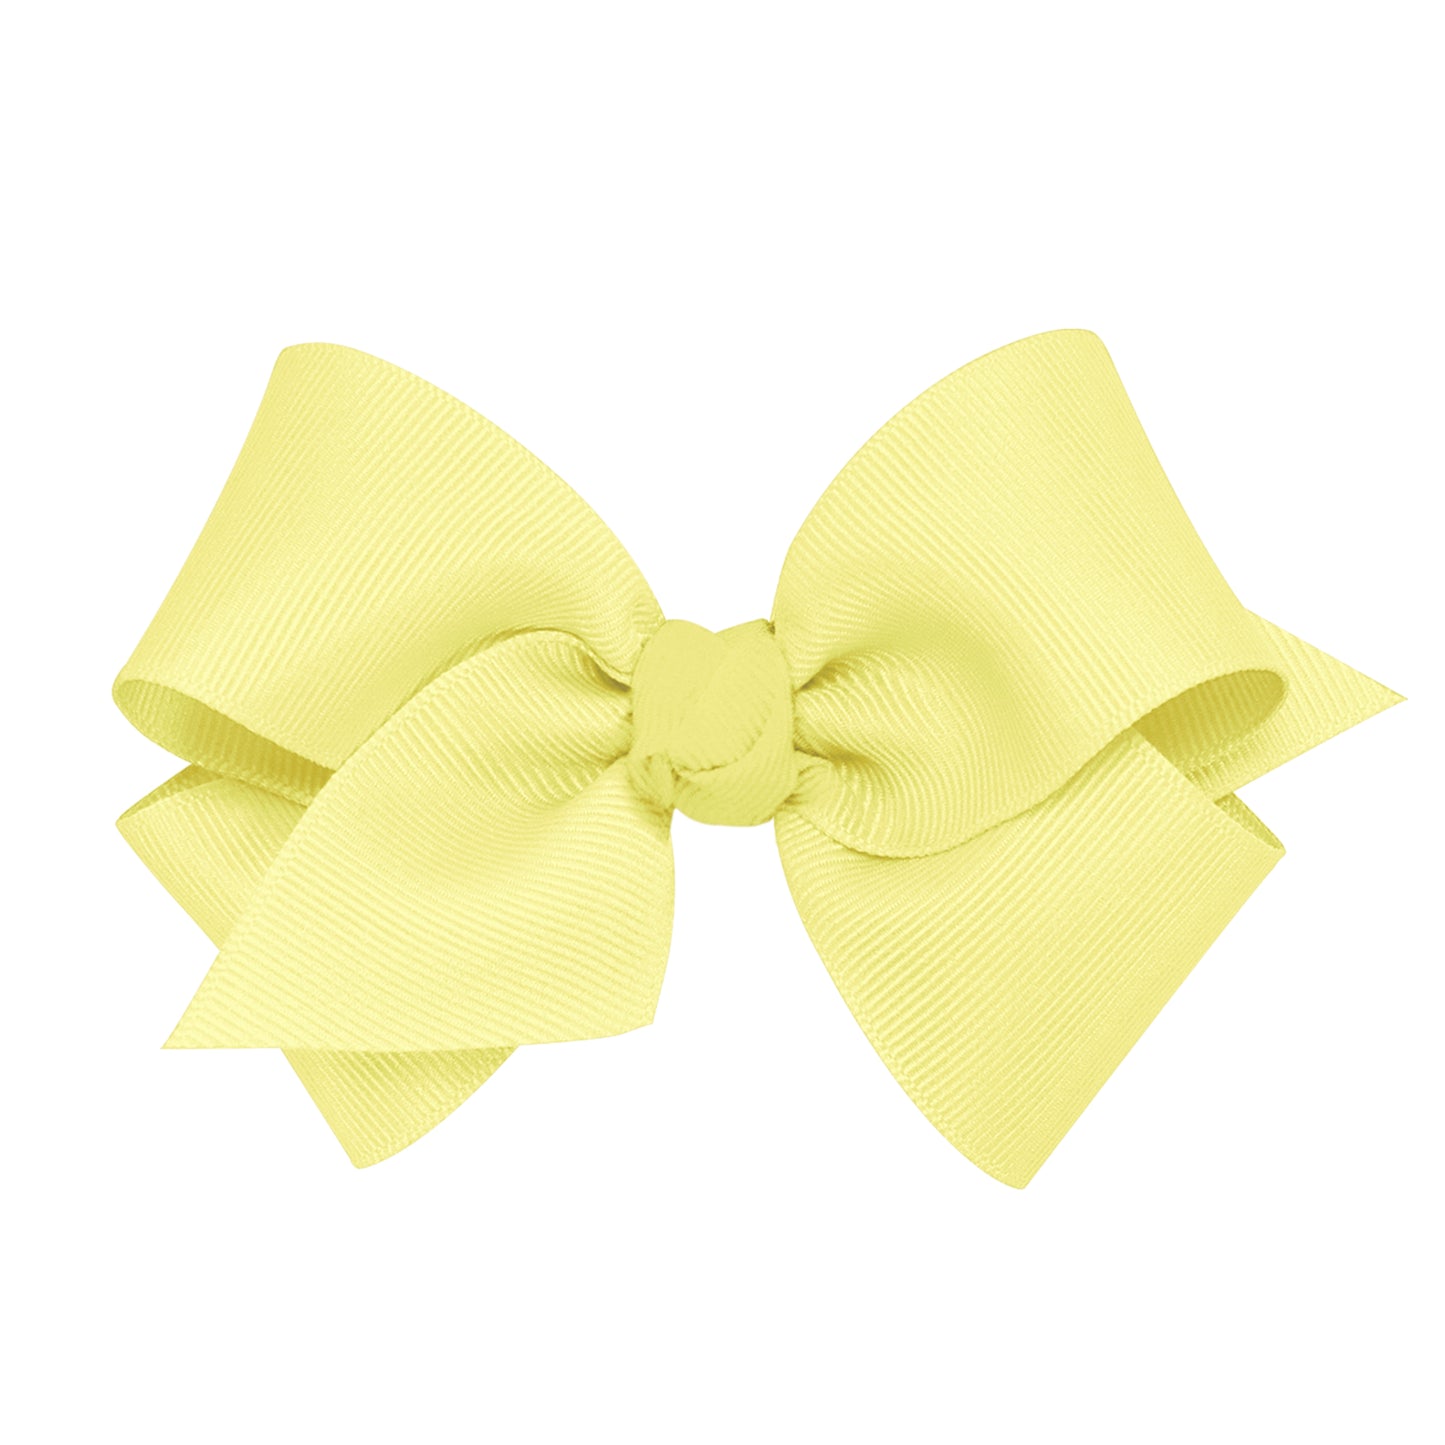 Small Grosgrain Hair Bow with Center Knot - Light Yellow